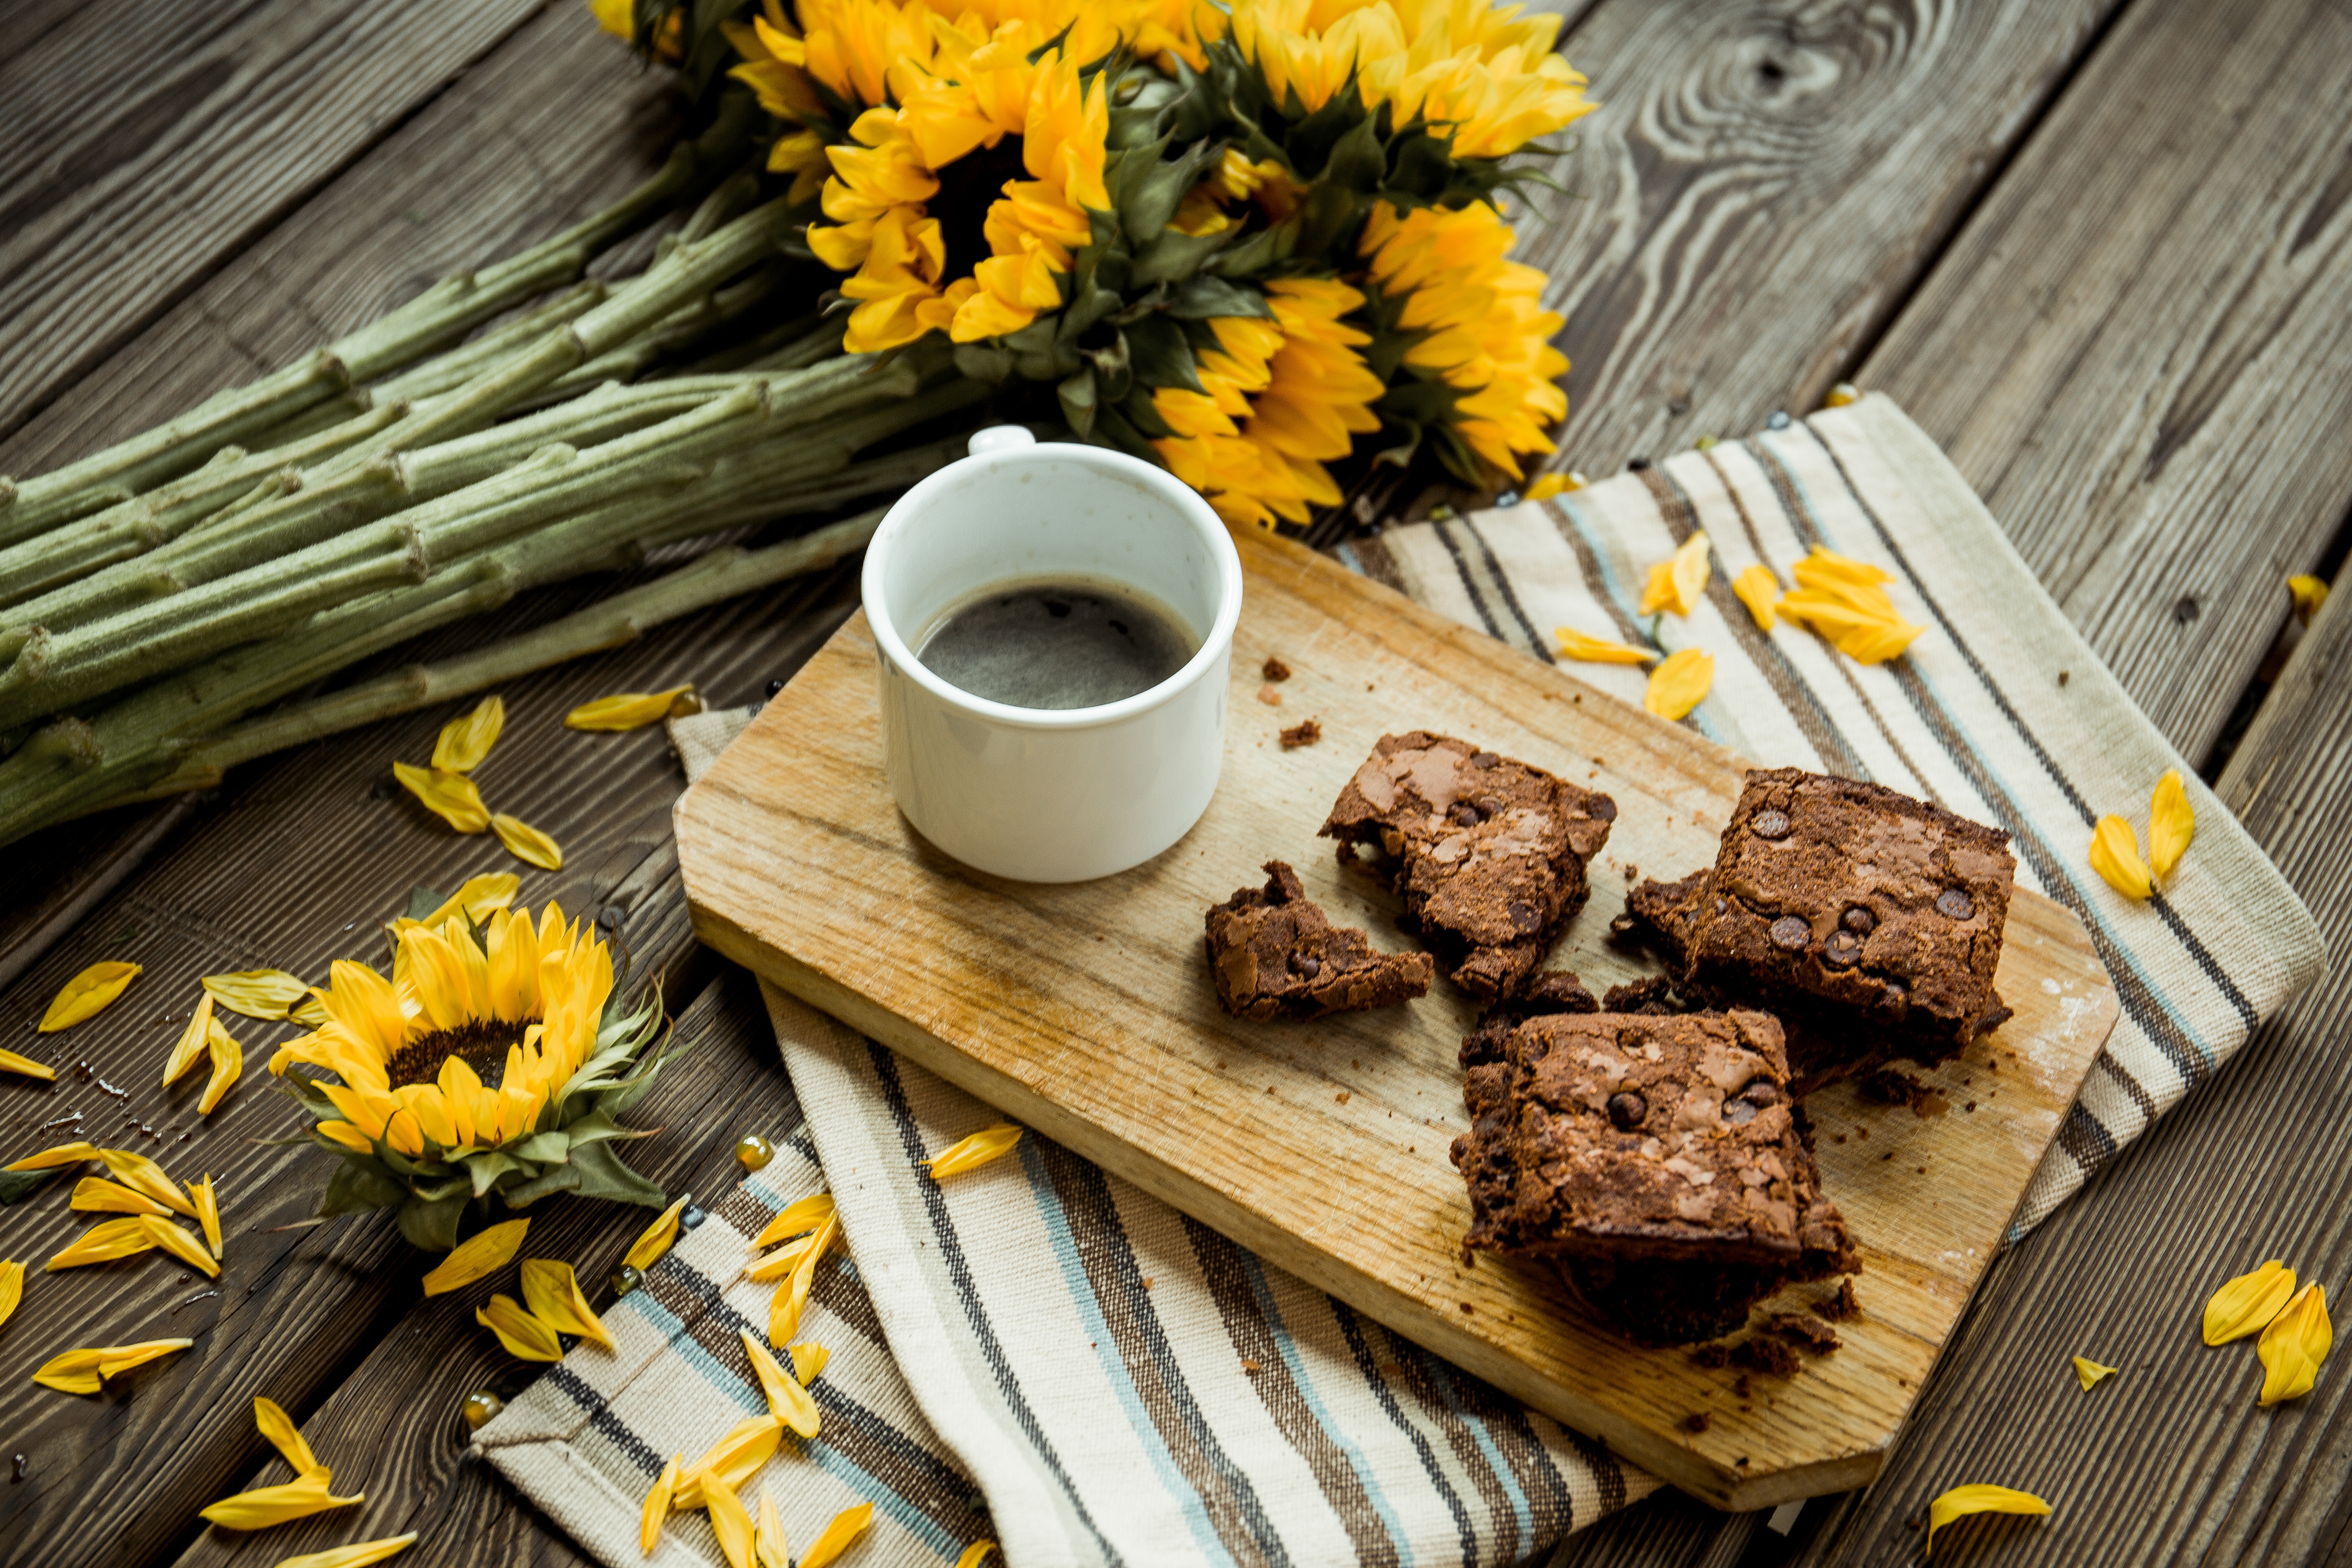 A few brownie squares on a cutting board next to a cup of coffee and a bouquet of fresh sunflowers.